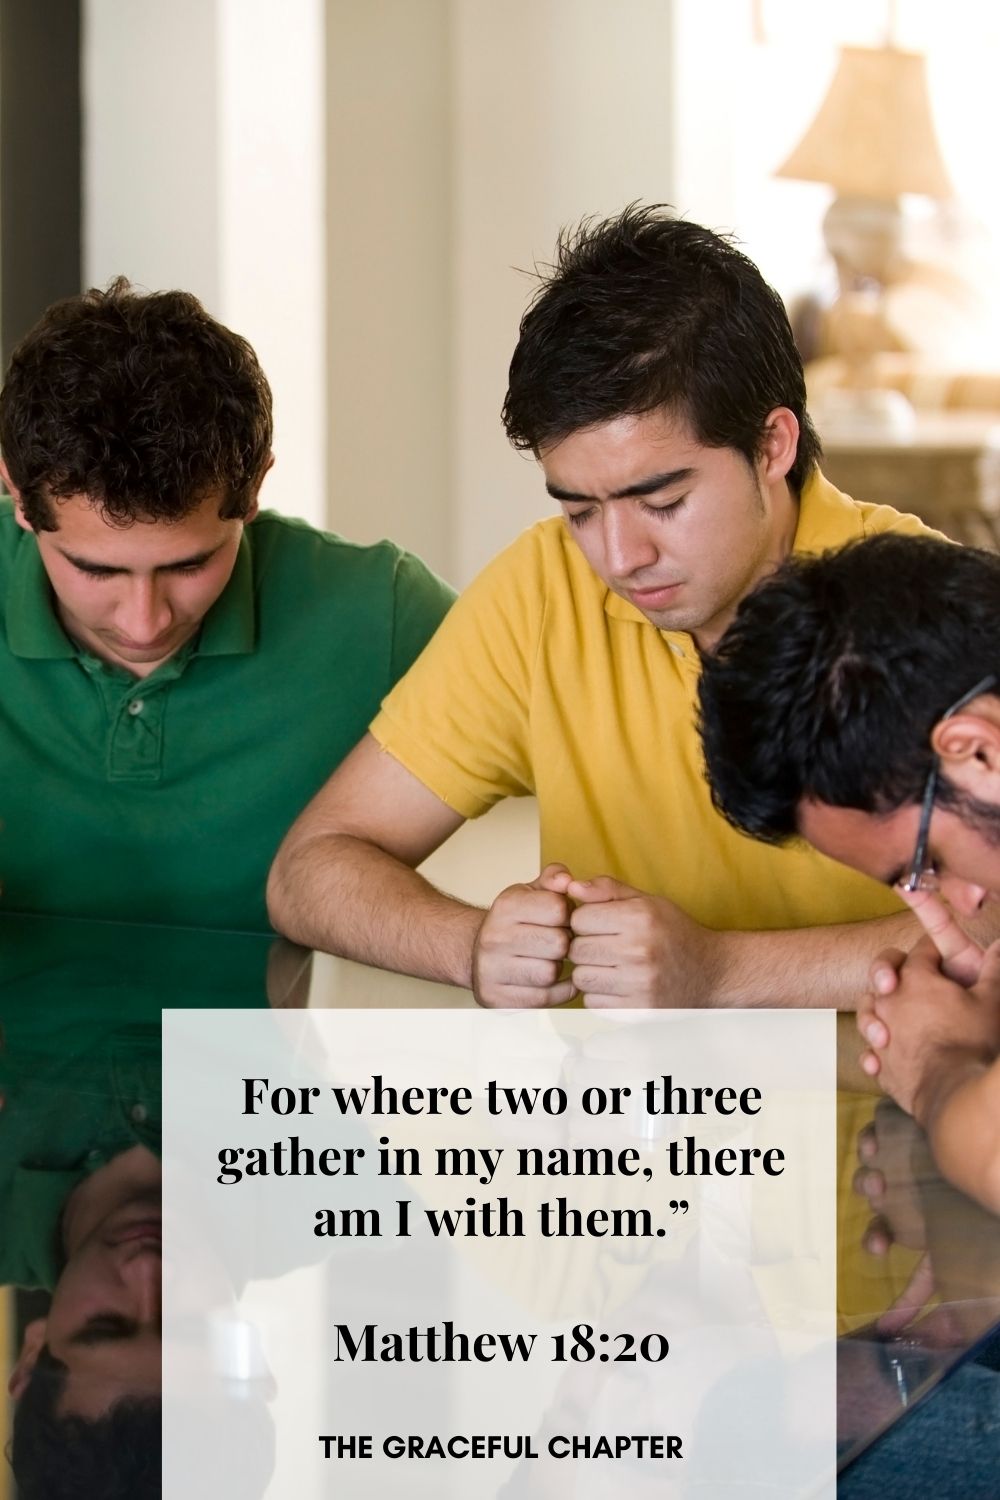 For where two or three gather in my name, there am I with them.”
Matthew 18:20